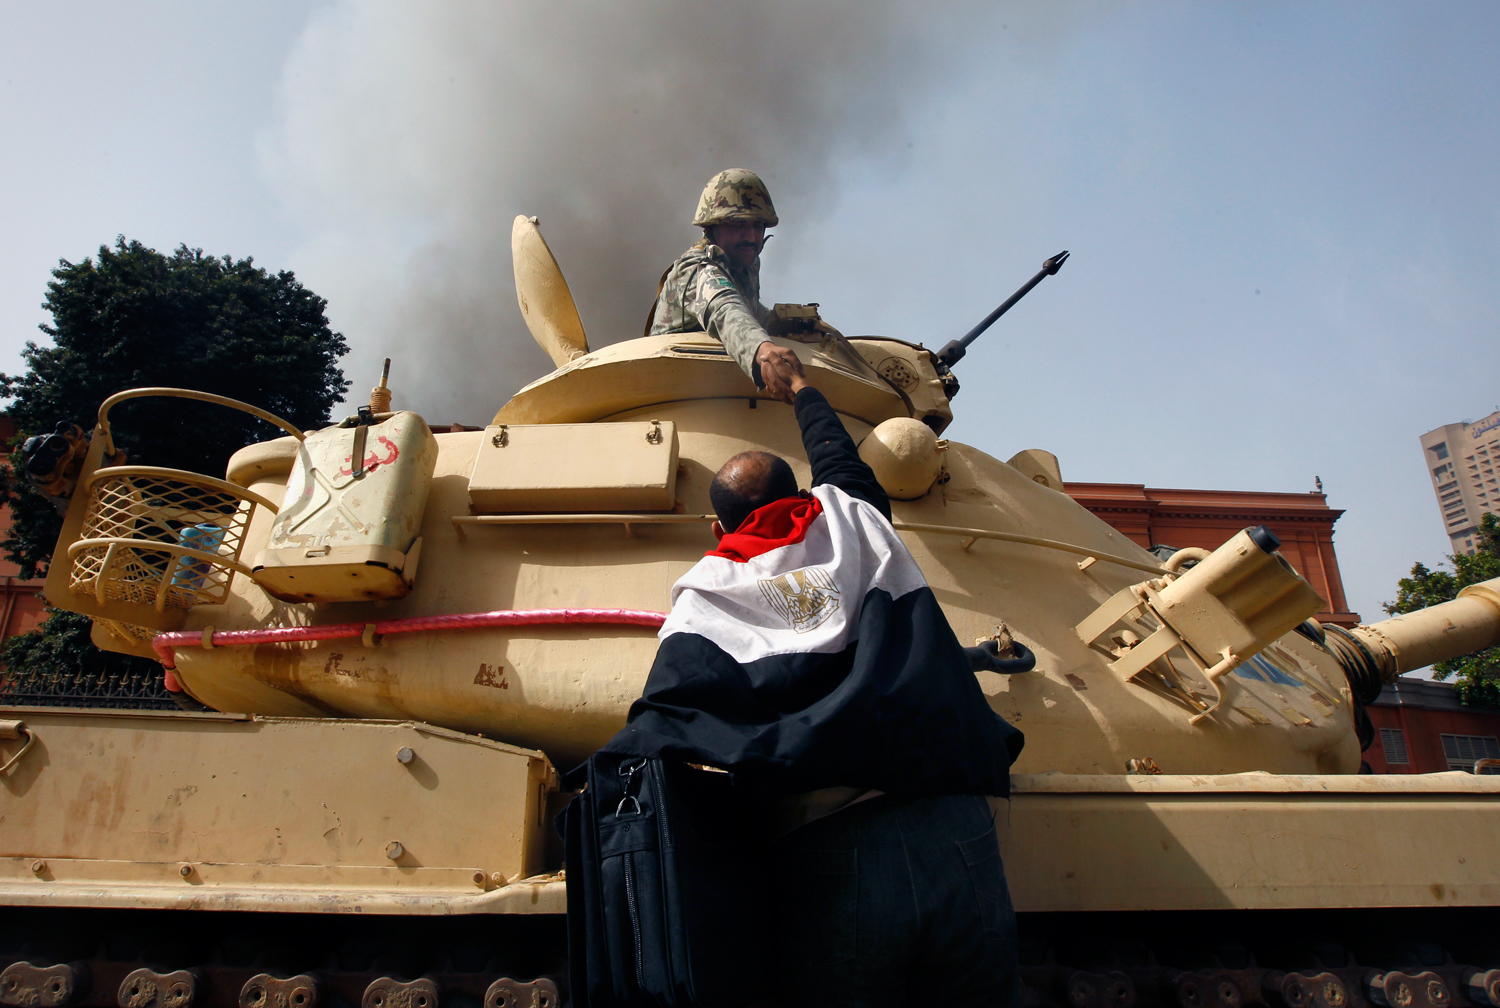 Egyptians embrace army soldiers after they refuse orders to fire on civilians. Cairo, Egypt, 2011